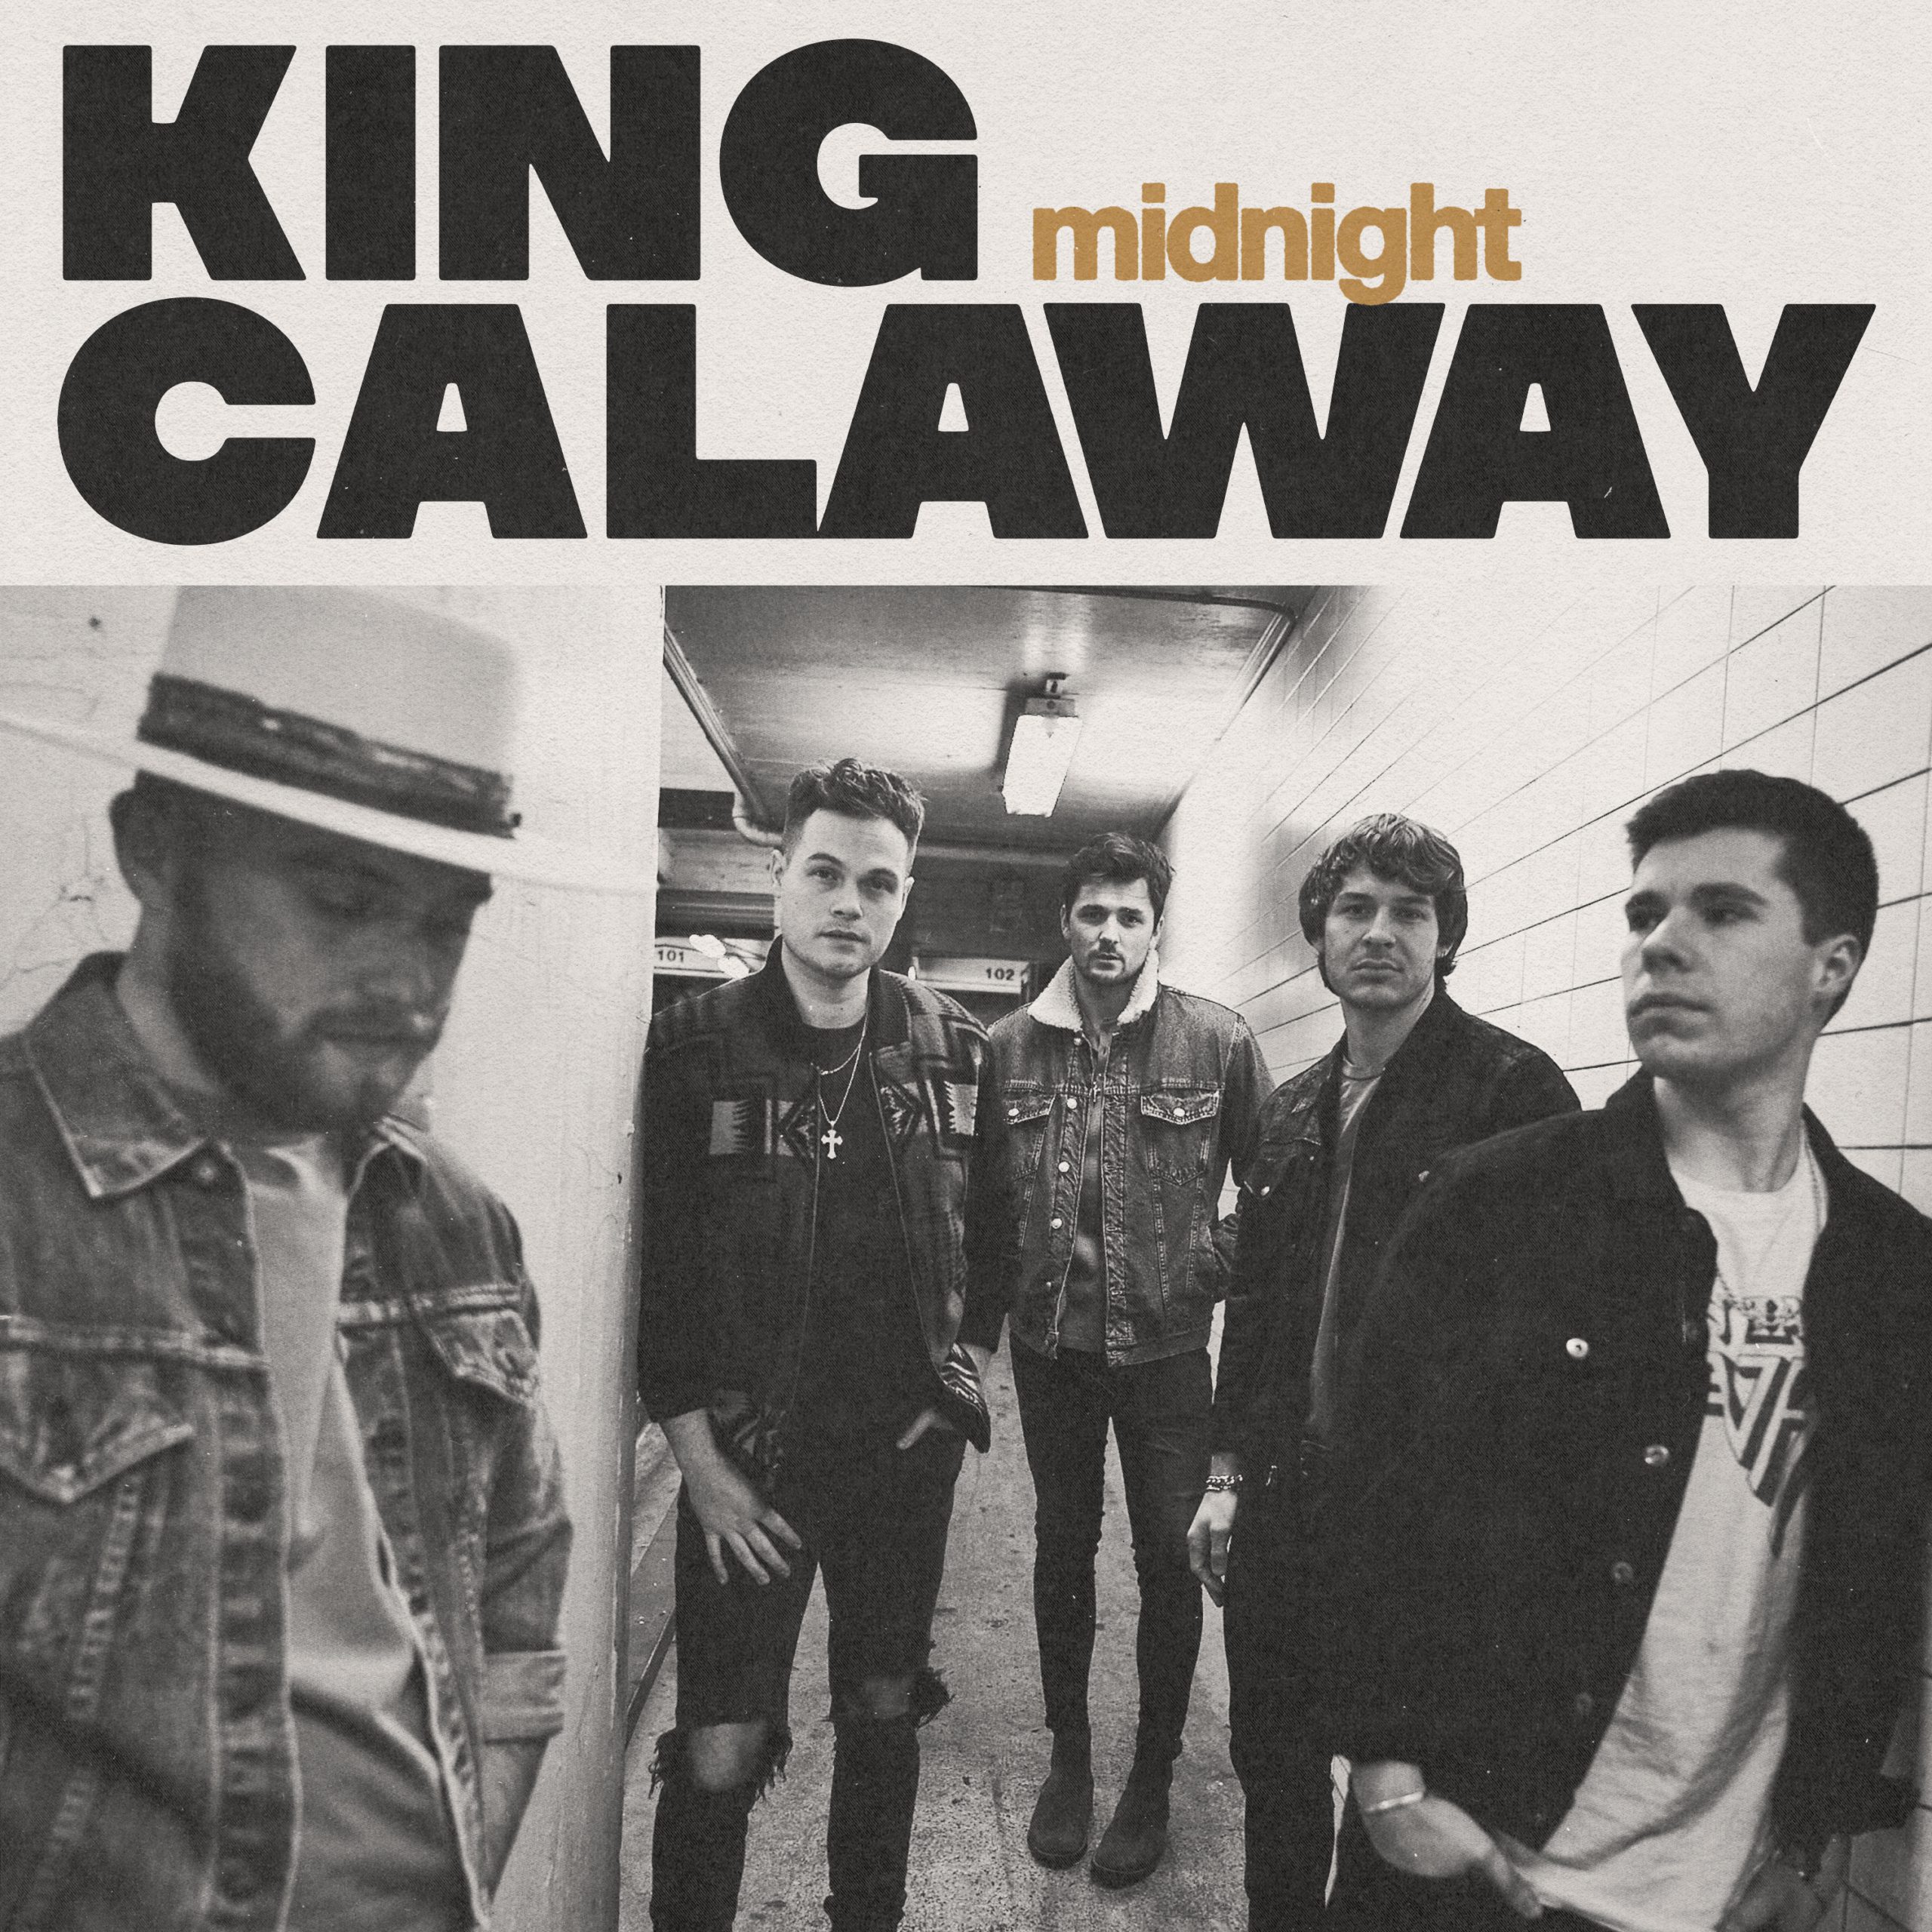 King Calaway Reemerges With 'Midnight' EP, Album Release Show